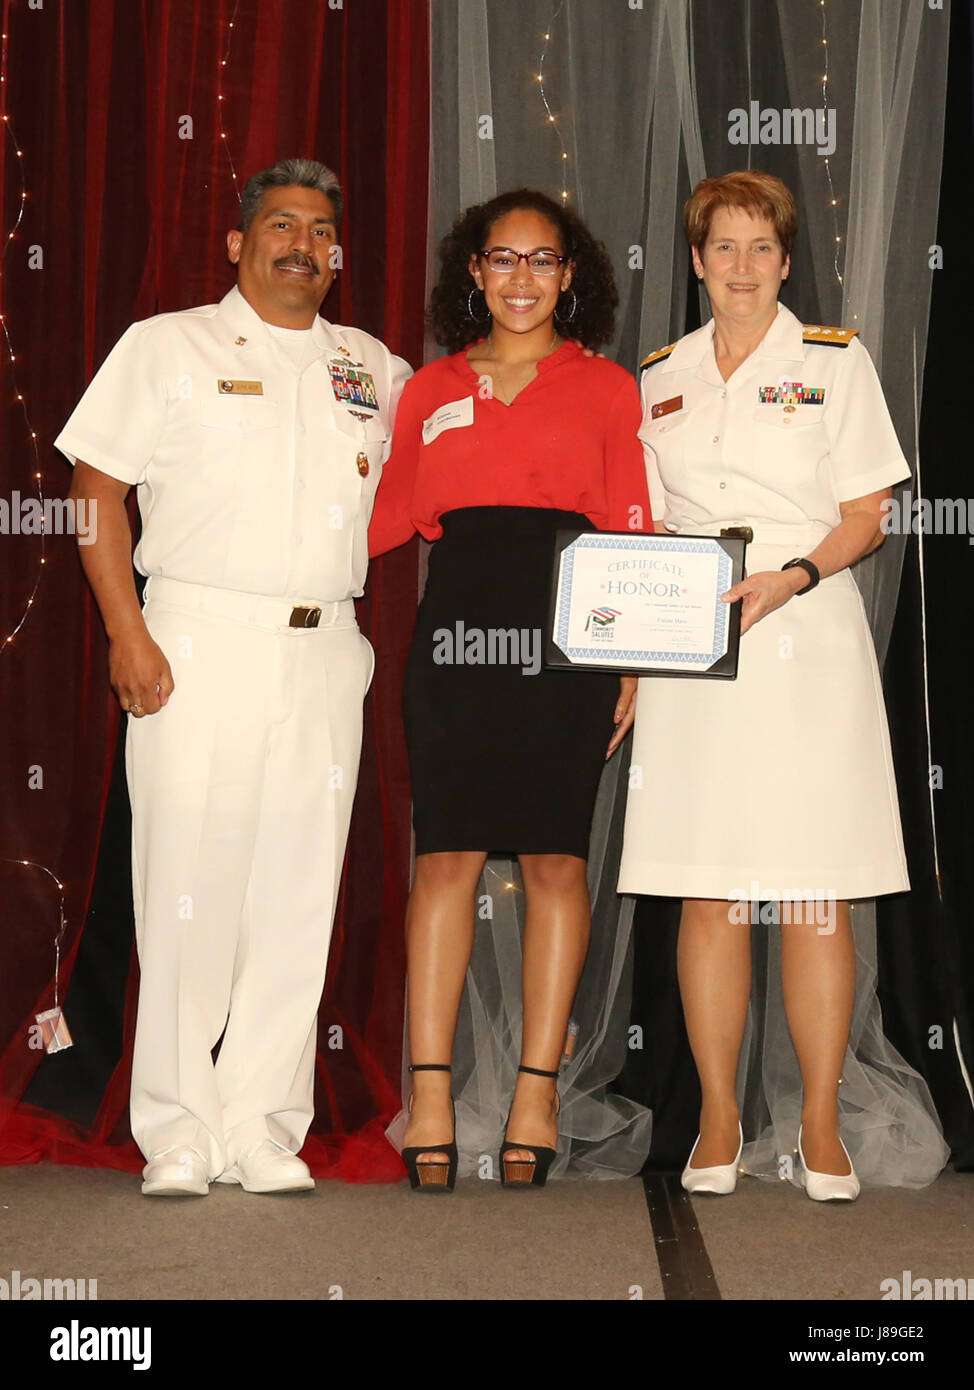 SAN ANTONIO – (May 17, 2017) Navy Rear Adm. Rebecca McCormick-Boyle, commander, Navy Medicine Education Training and Logistics Command, and Command Master Chief Mitchell Sepulveda Sr. pose with Kiana Cardena, a future Sailor, who was honored during Our Community Salutes-San Antonio’s 6th Annual “A Night in Your Honor” held in the Rosenberg Sky Room at the University of the Incarnate Word.  Each honoree received an Our Community Salutes certificate and challenge coin from USAA. (Courtesy Photo by Edward Jones, R40 Photos/Released) Stock Photo